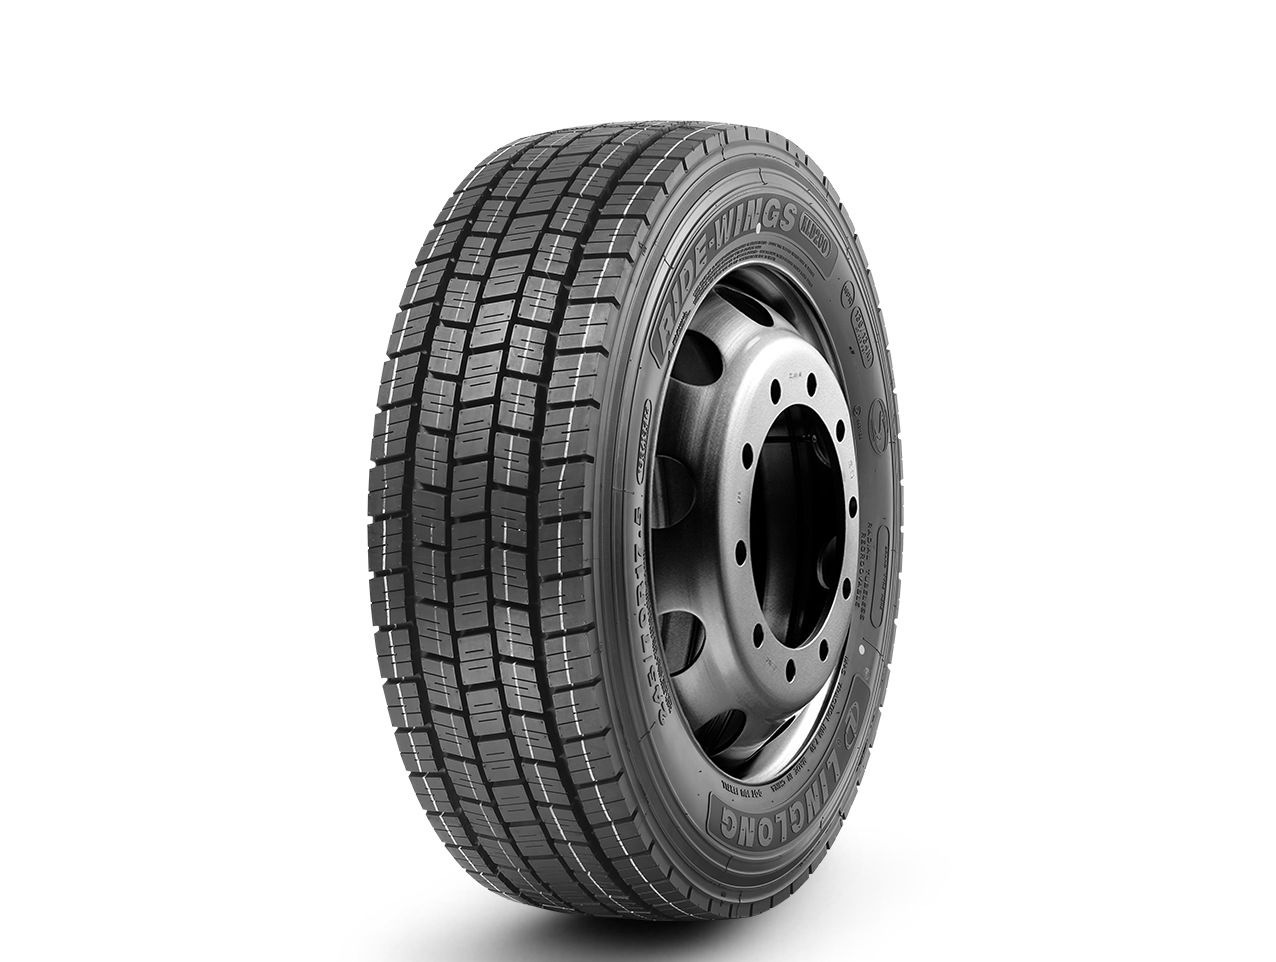 Gomme Nuove Linglong 225/75 R17.5C 129M KLD200 M+S pneumatici nuovi All Season